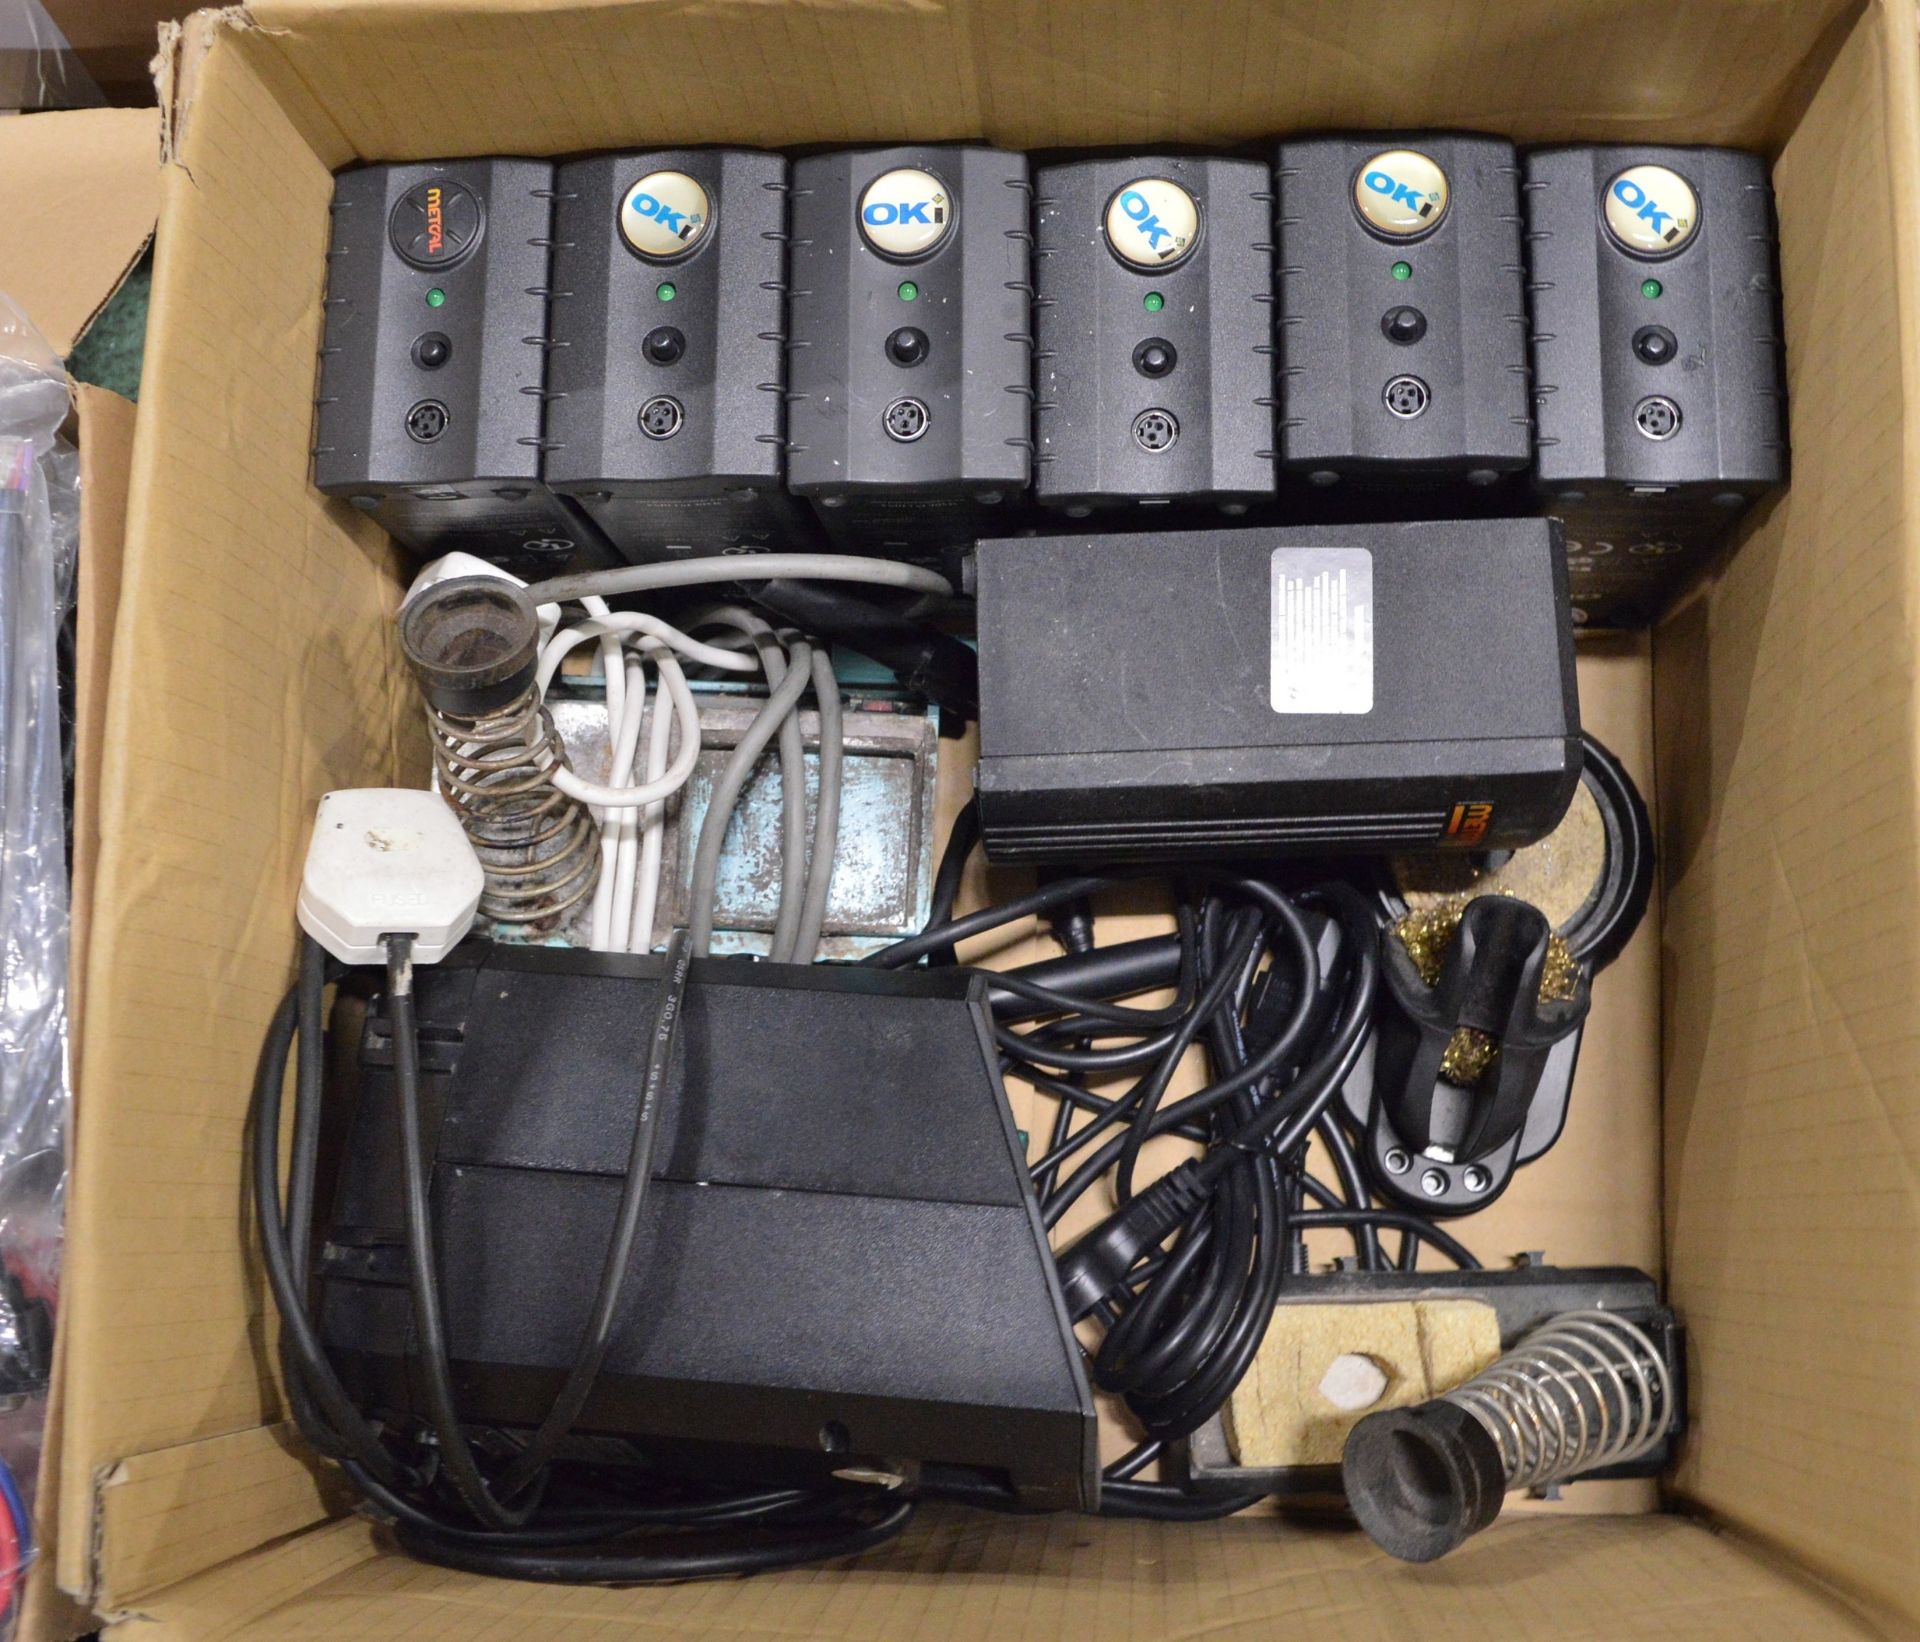 5 Watt antennas, Terminal blocks, OKI battery chargers, various cables, 19 inch rack tray - Image 4 of 5